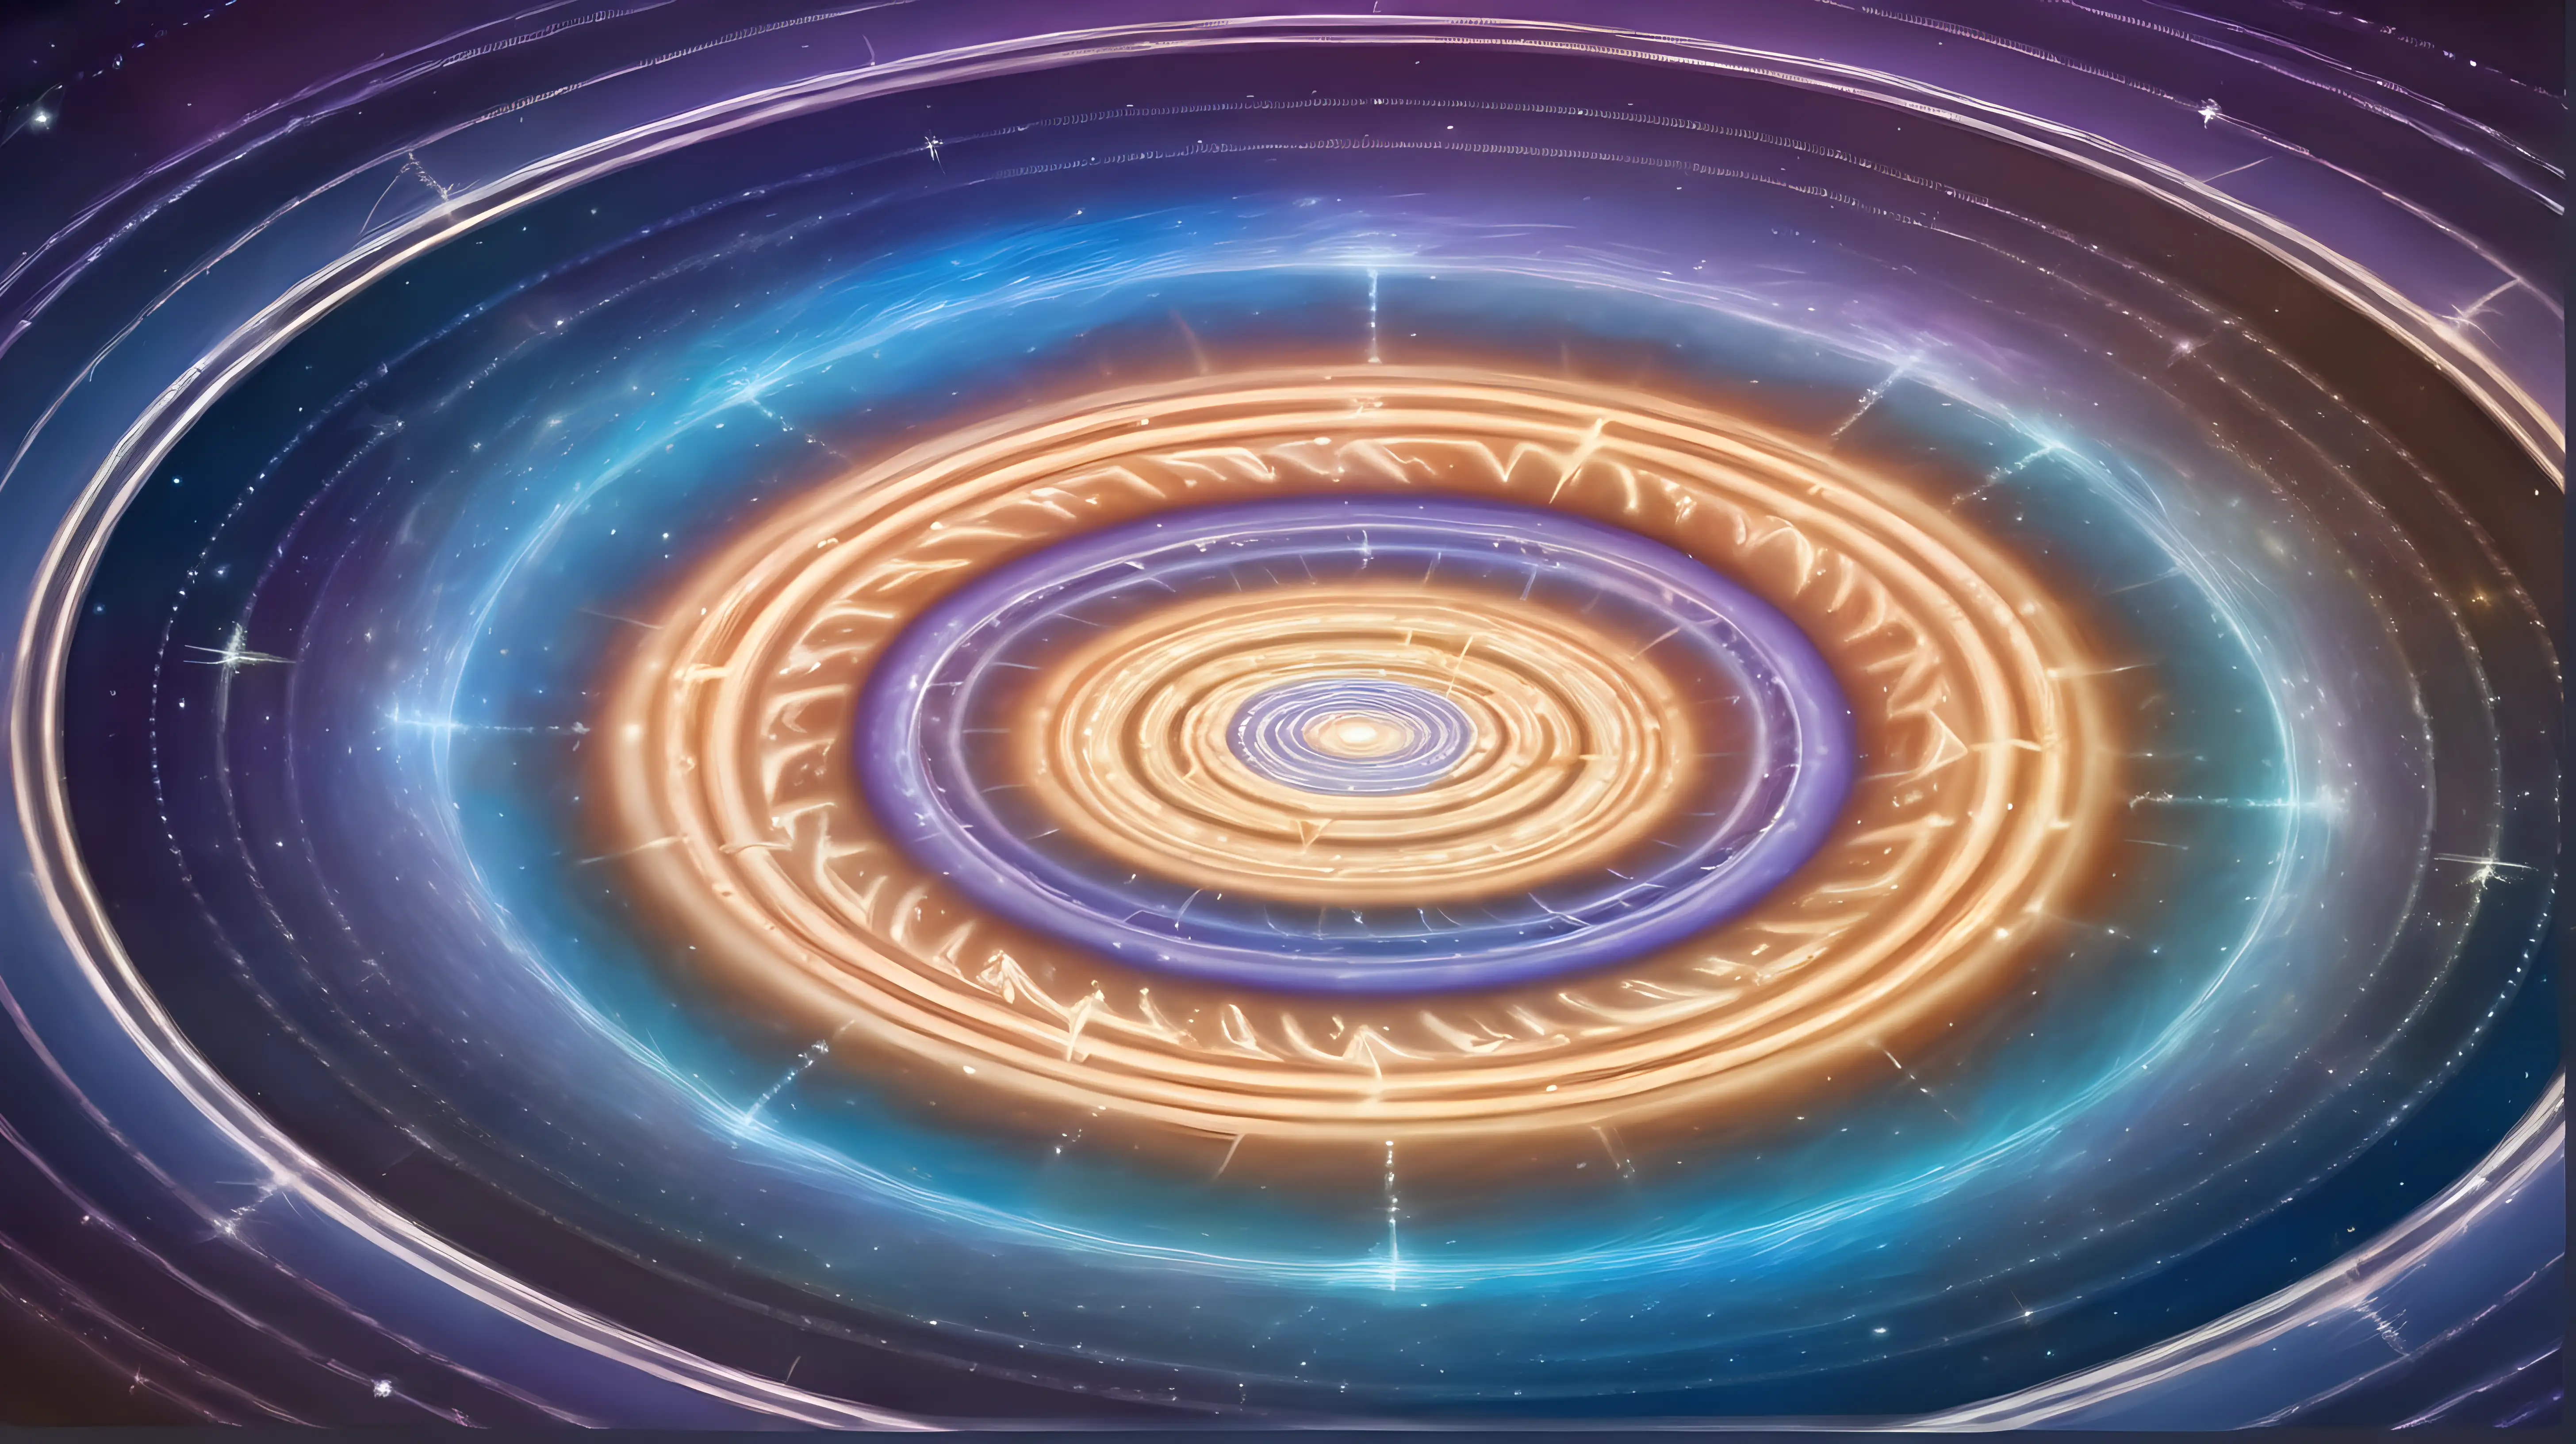 Develop a background with a central time spiral nexus, radiating outward with dynamic energy, conveying the idea of a central point for time convergence.